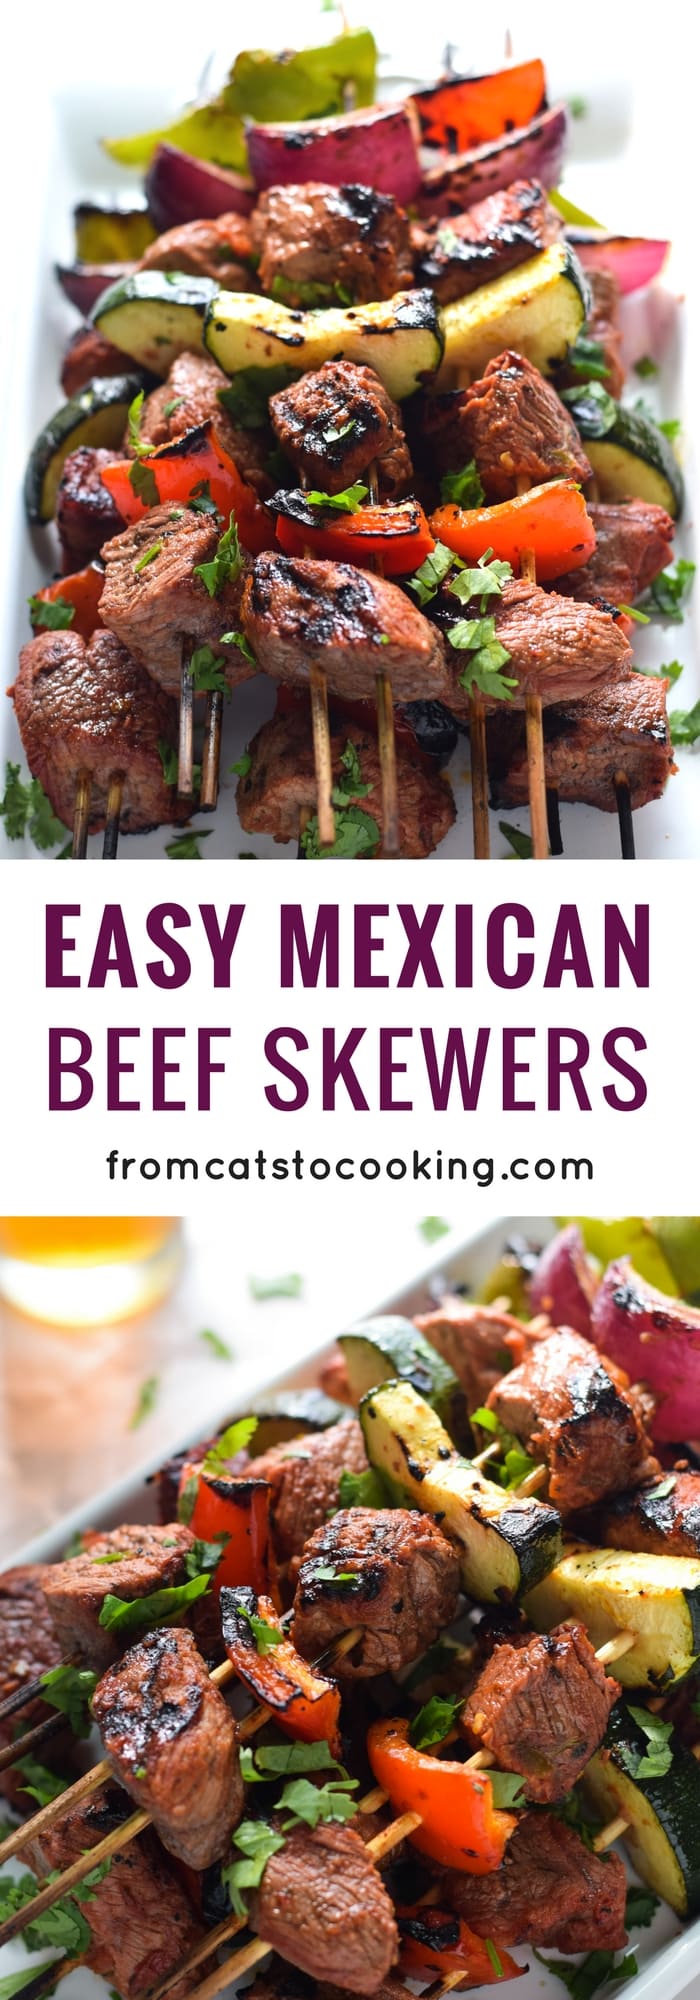 Made with marinated sirloin steak and delicious vegetables like zucchini, bell peppers and onions, these Easy Mexican Beef Skewers are the perfect appetizer or dinner for entertaining! (gluten free, paleo and low carb)